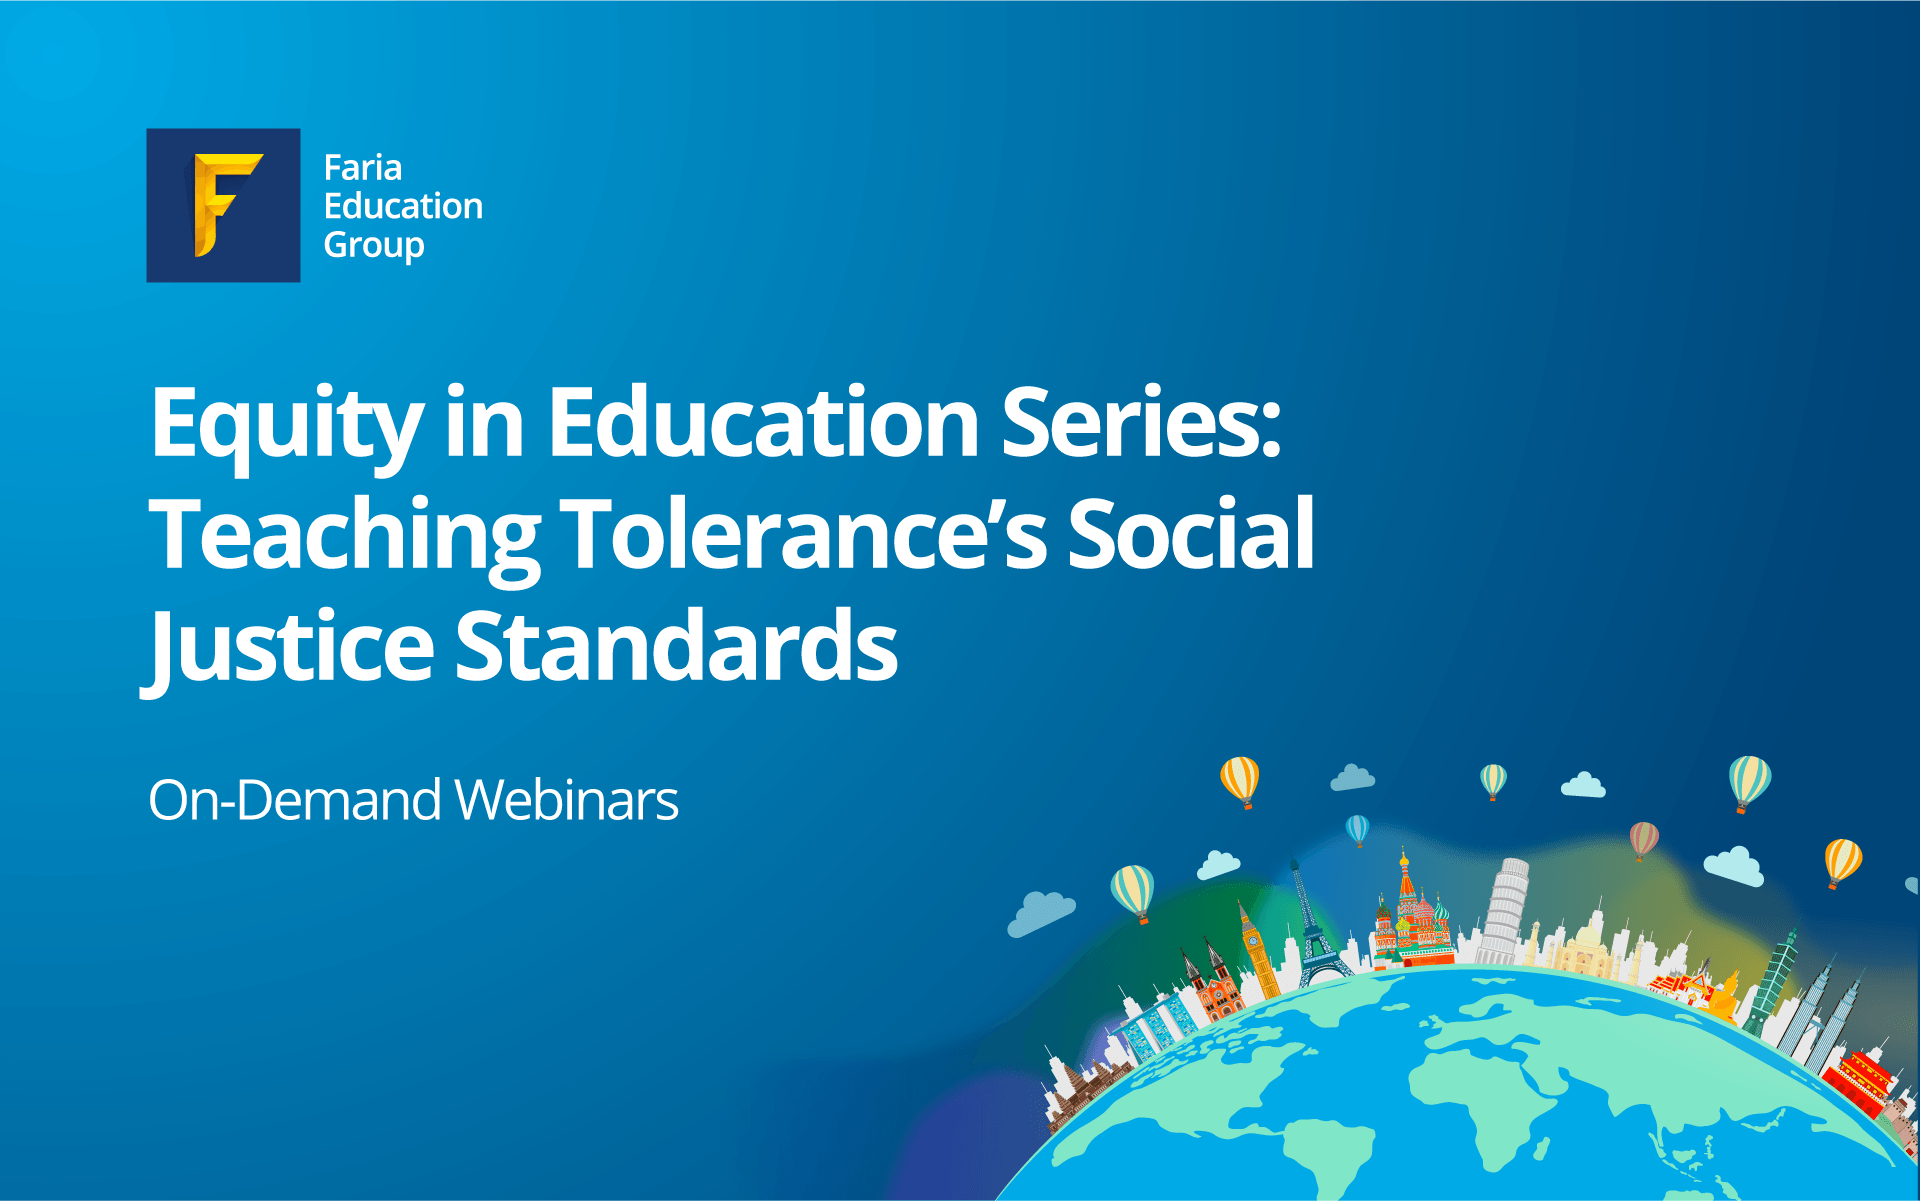 Equity in Education Series: Teaching Tolerance's Social Justice Standards